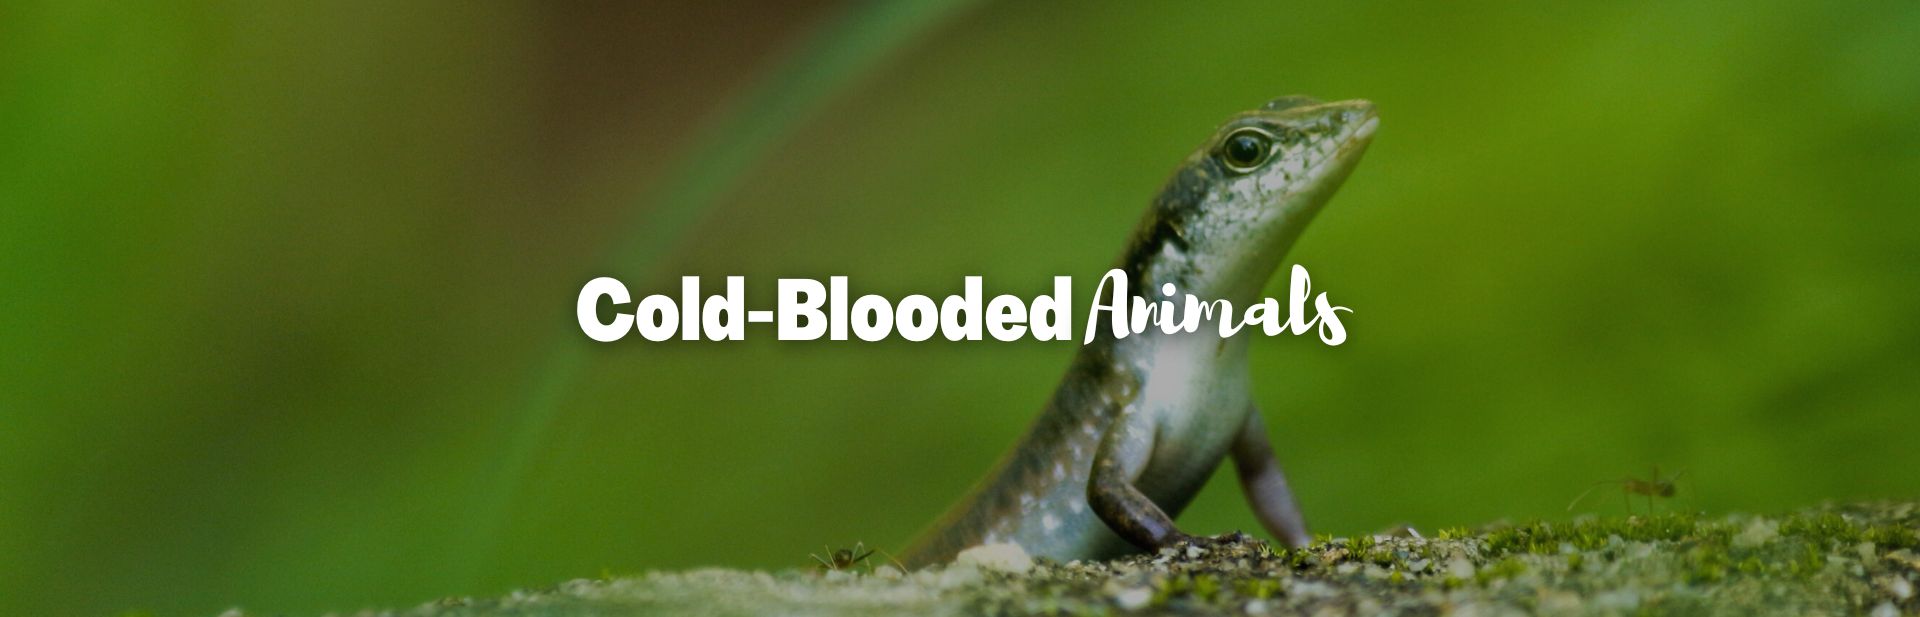 Cold-Blooded Animals Listed: The Coolest Creatures in the World, Literally!